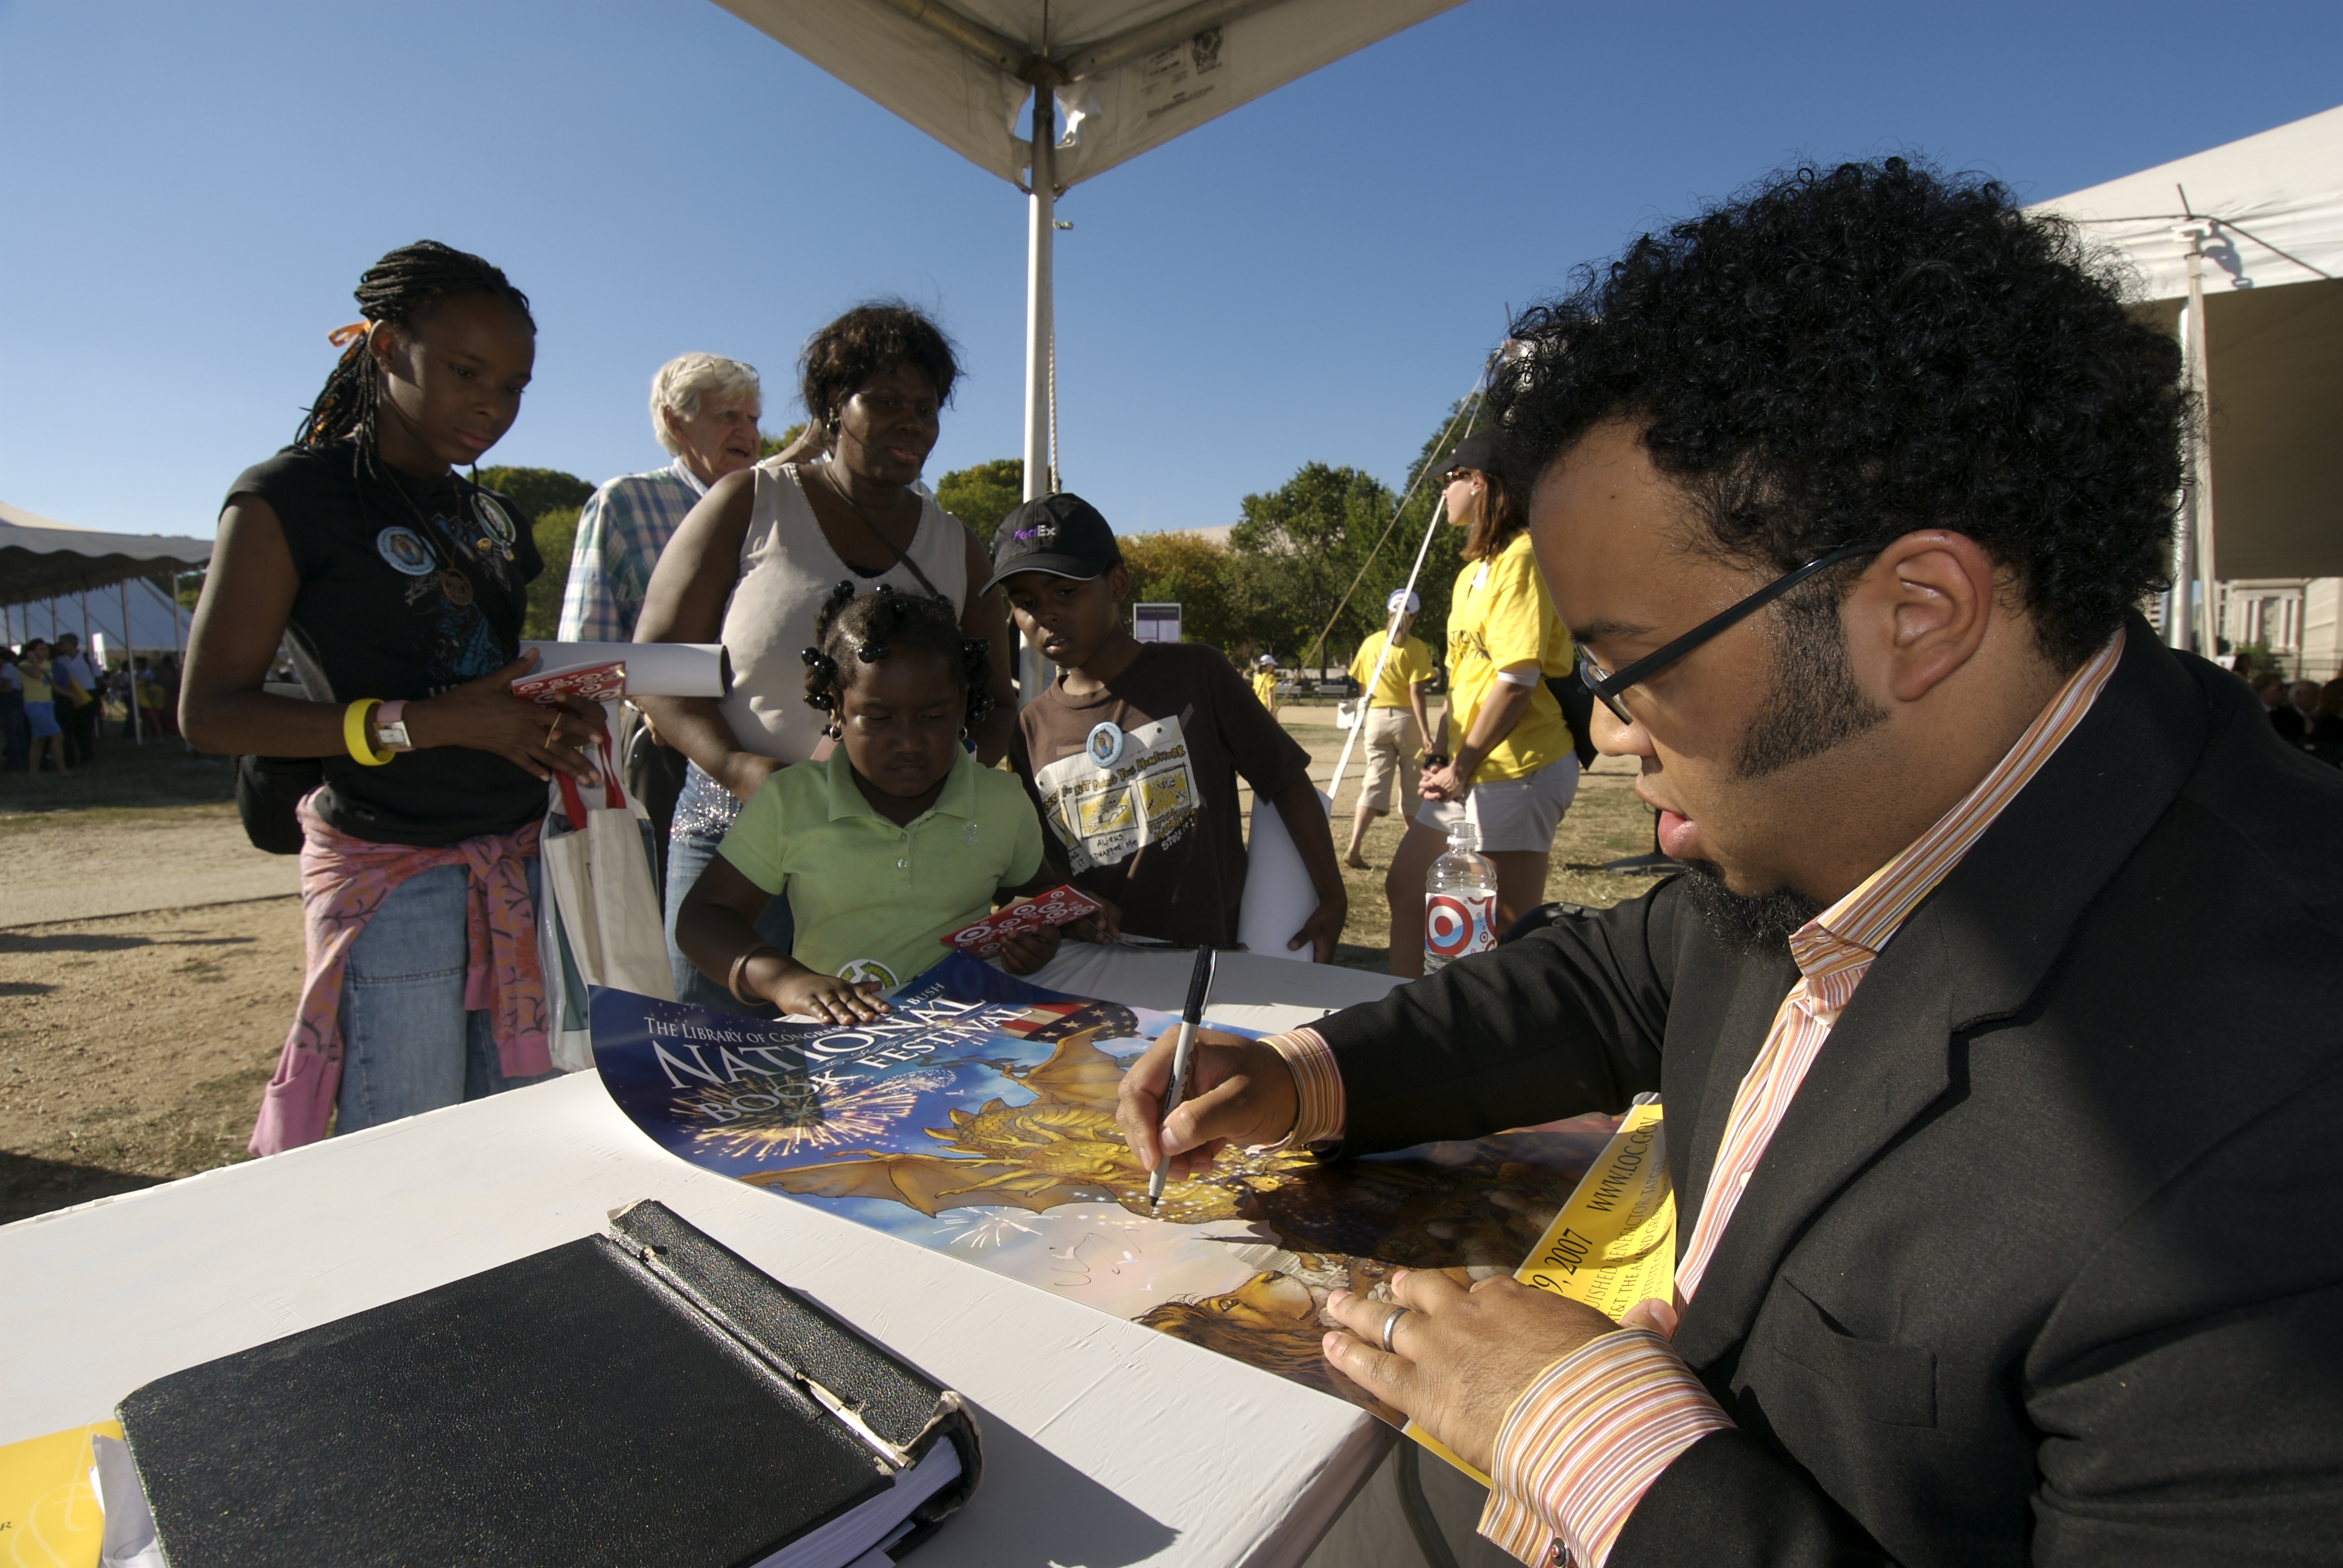 Kevin Young signing a poster with kids standing around him.